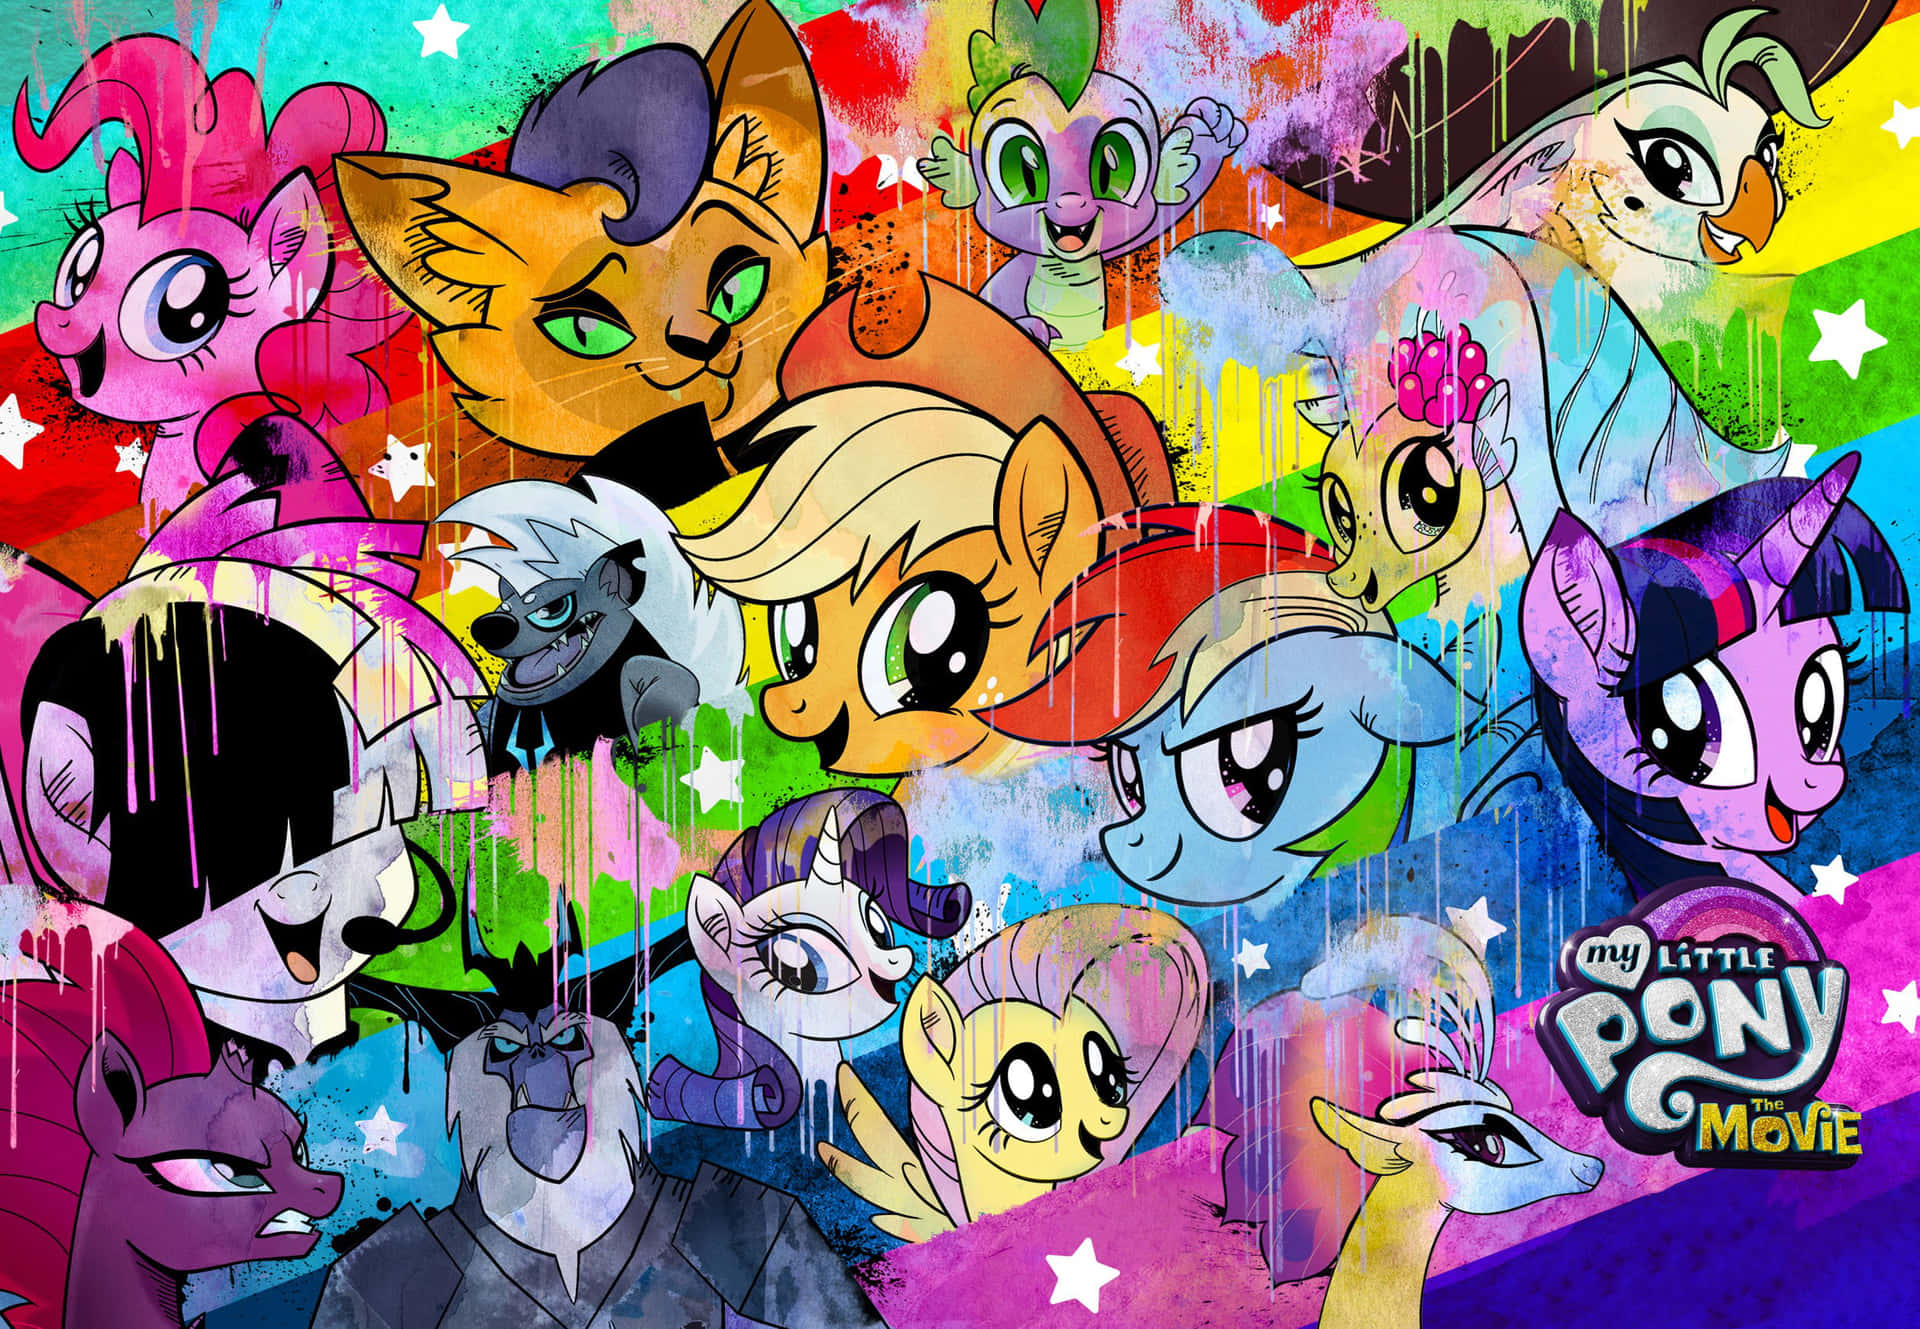 Get Ready to Join the Rainbow with My Little Pony